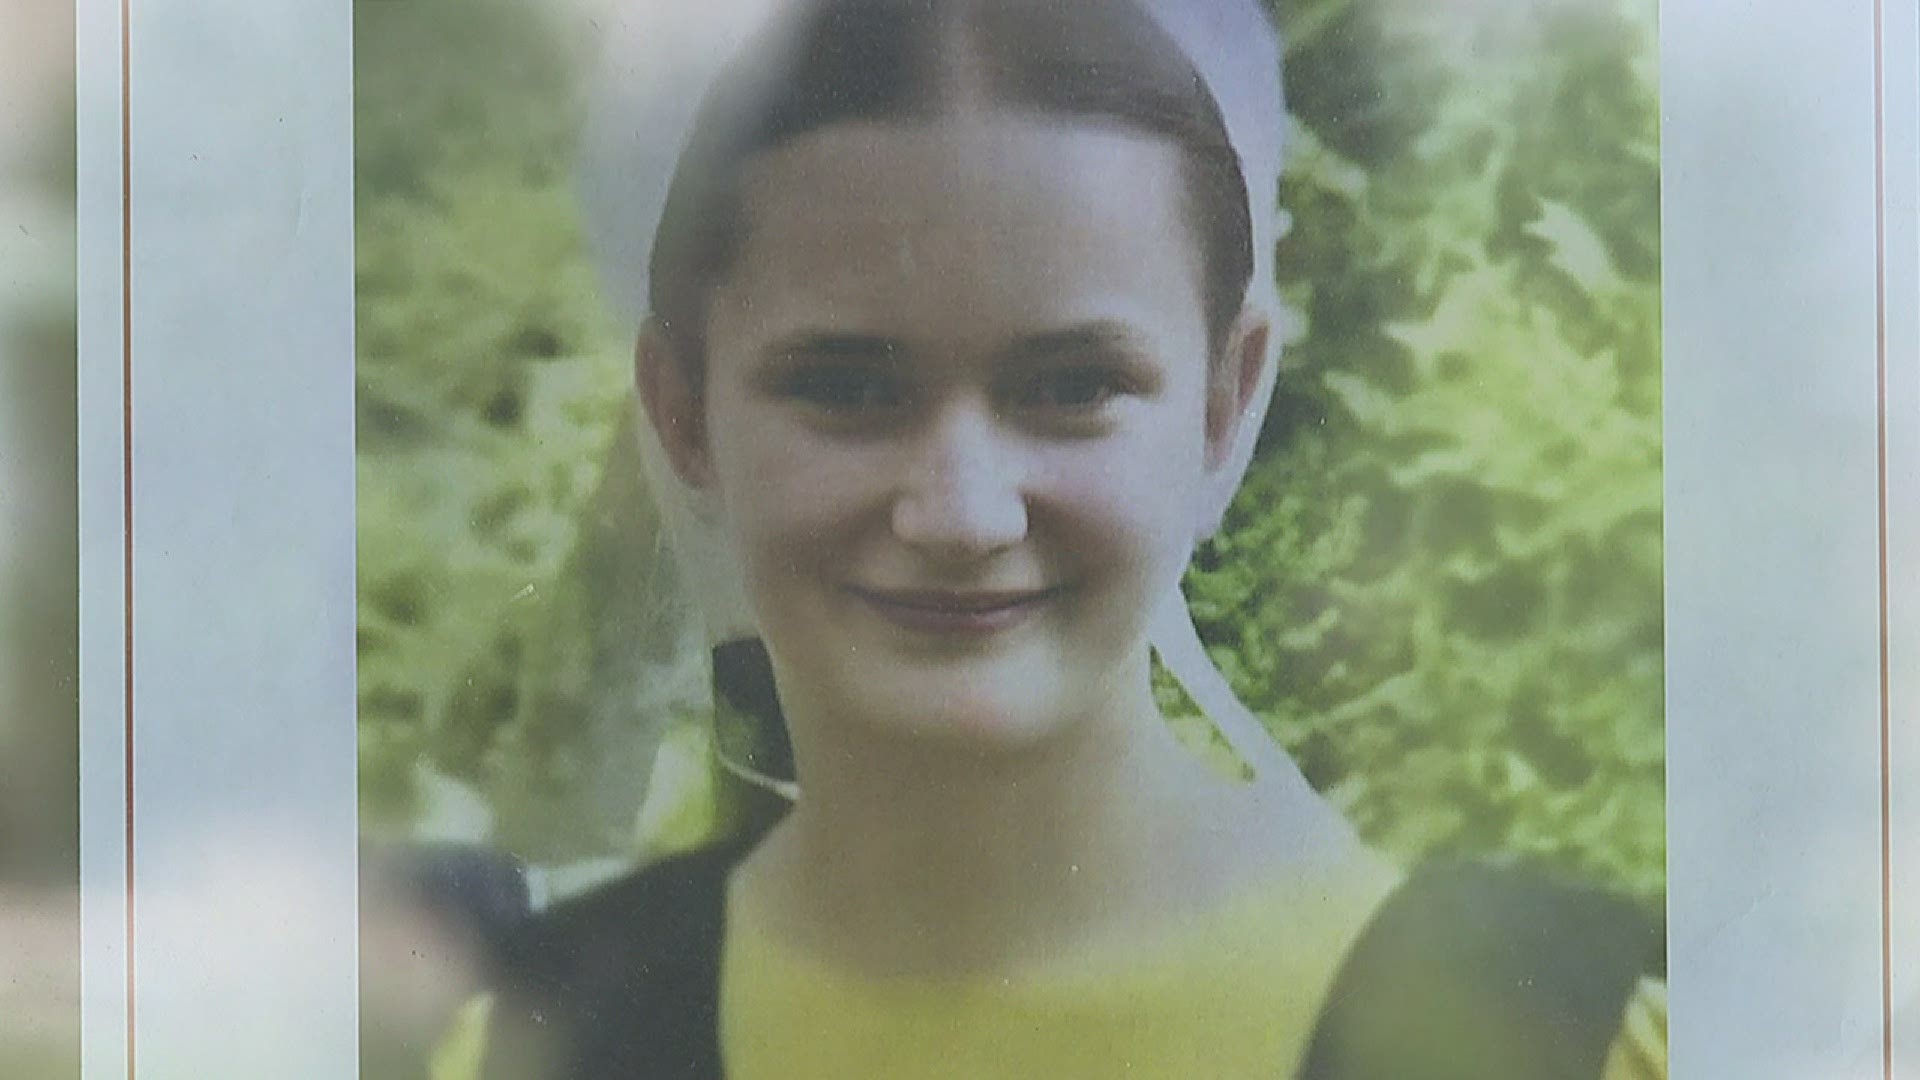 Police address rumors circulating online regarding disappearance of 18-year-old Amish woman